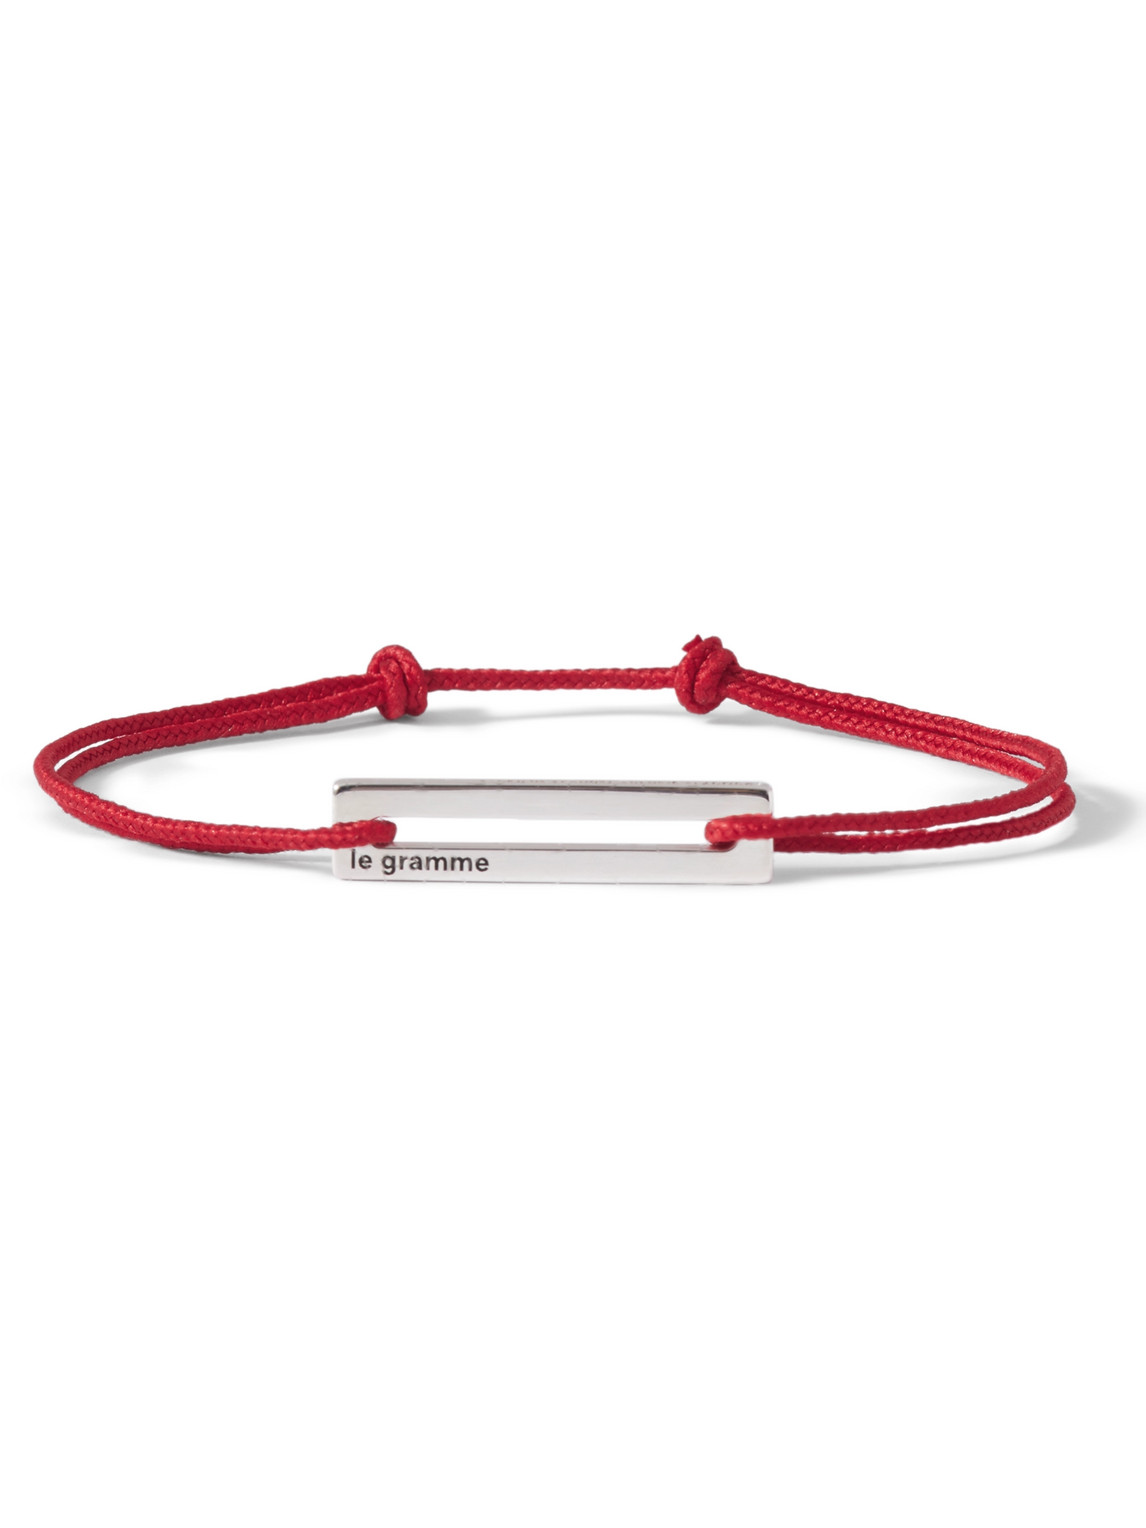 Le Gramme 1.7g Cord And Sterling Silver Bracelet In Red